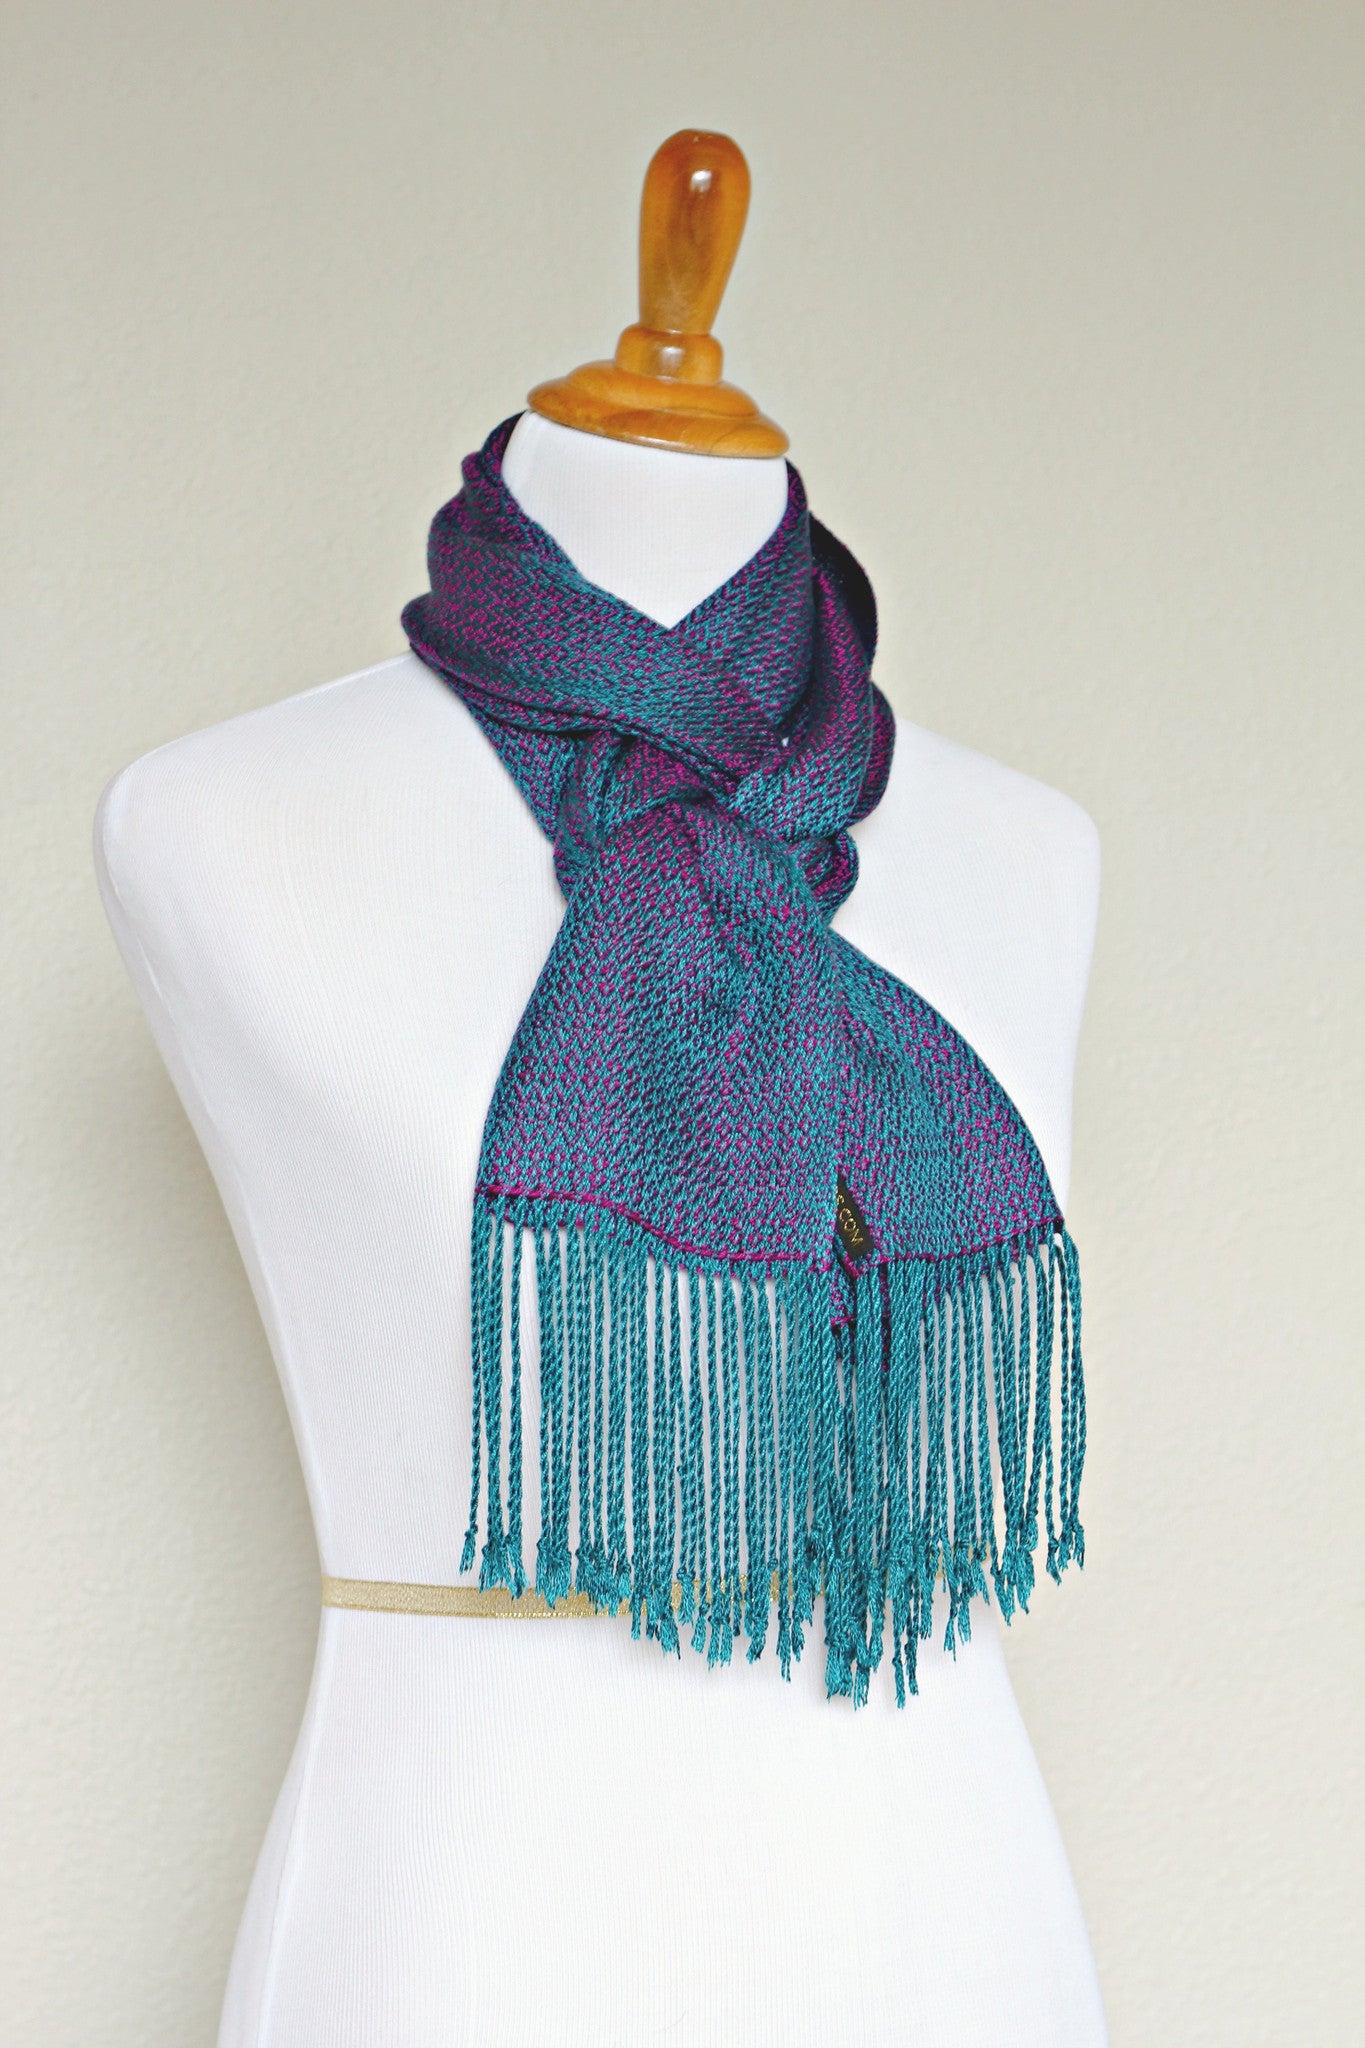 Woven scarf, chameleon scarf in teal and purple colors, long scarf with fringe